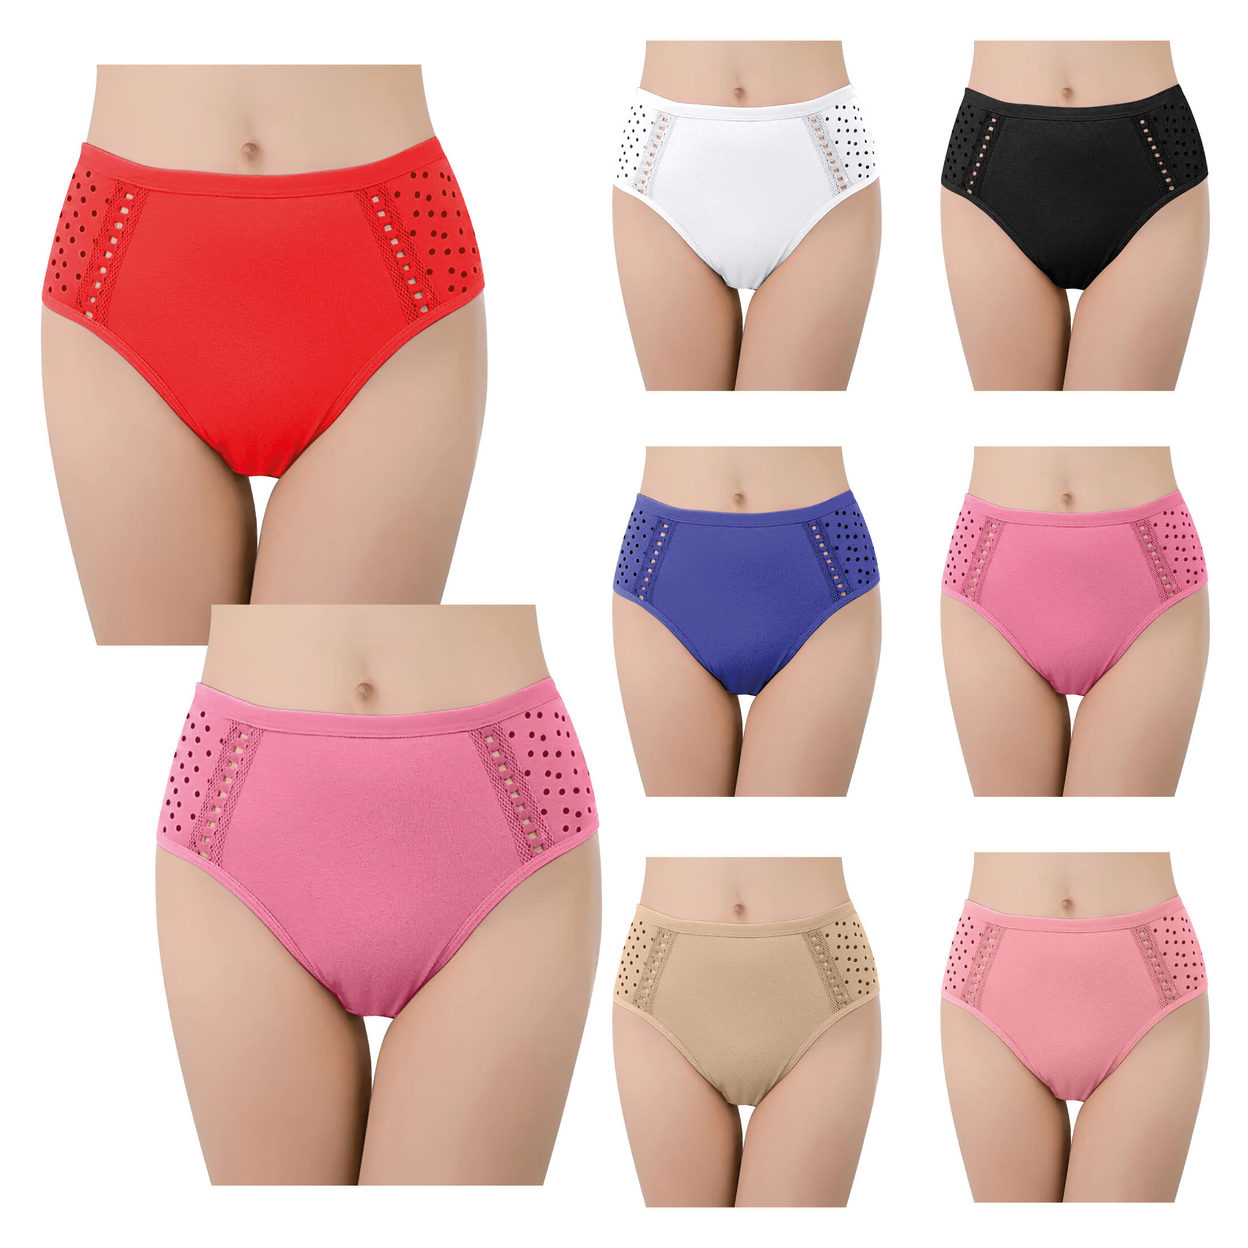 12-Pack: Women's Ultra Soft Moisture Wicking Panties Cotton Perfect Fit Underwear (Plus Sizes Available) - X-large